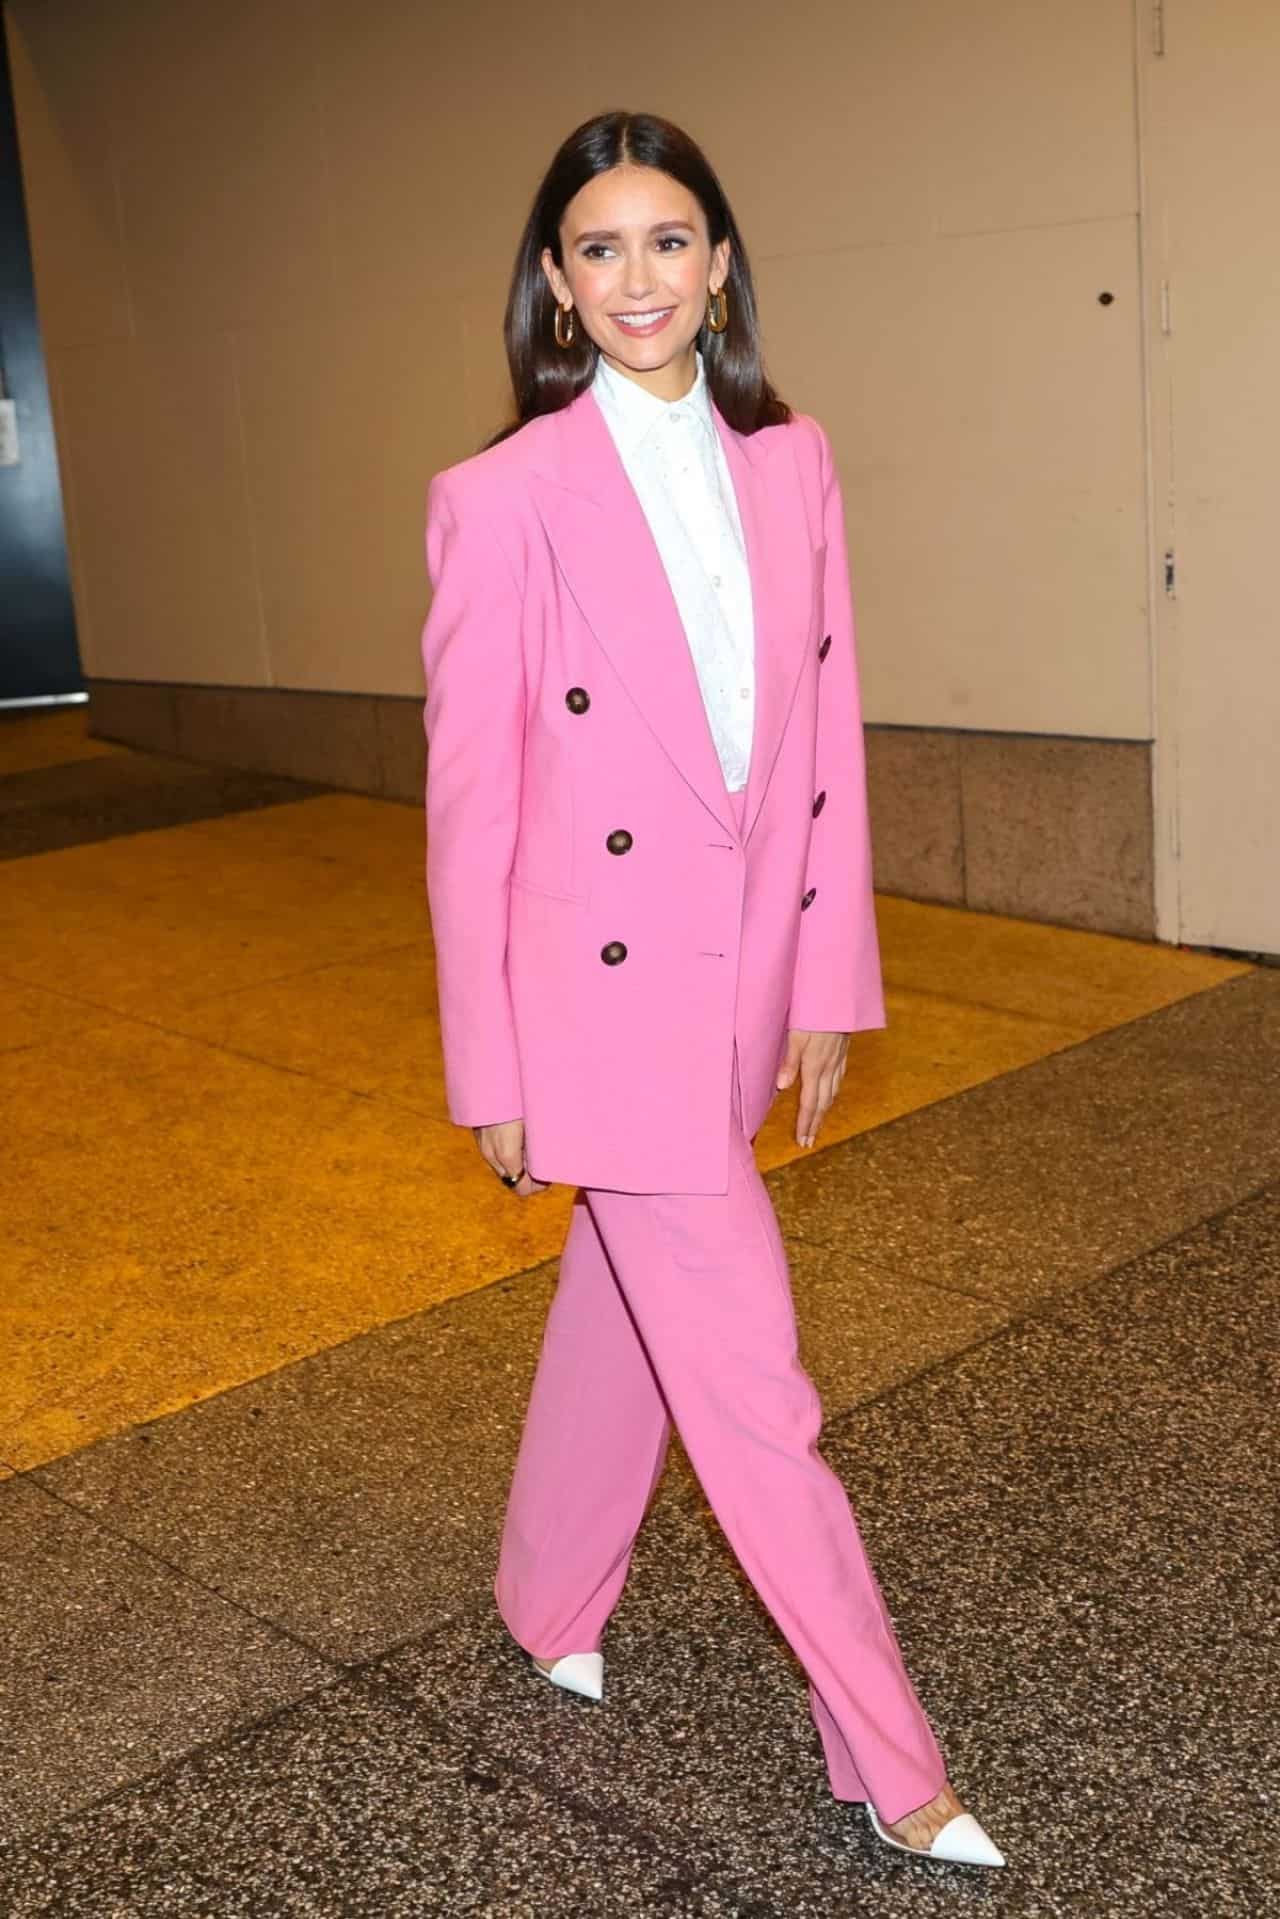 Nina Dobrev Rocks a Stylish Pink Suit for “The Out-Laws” Promotion